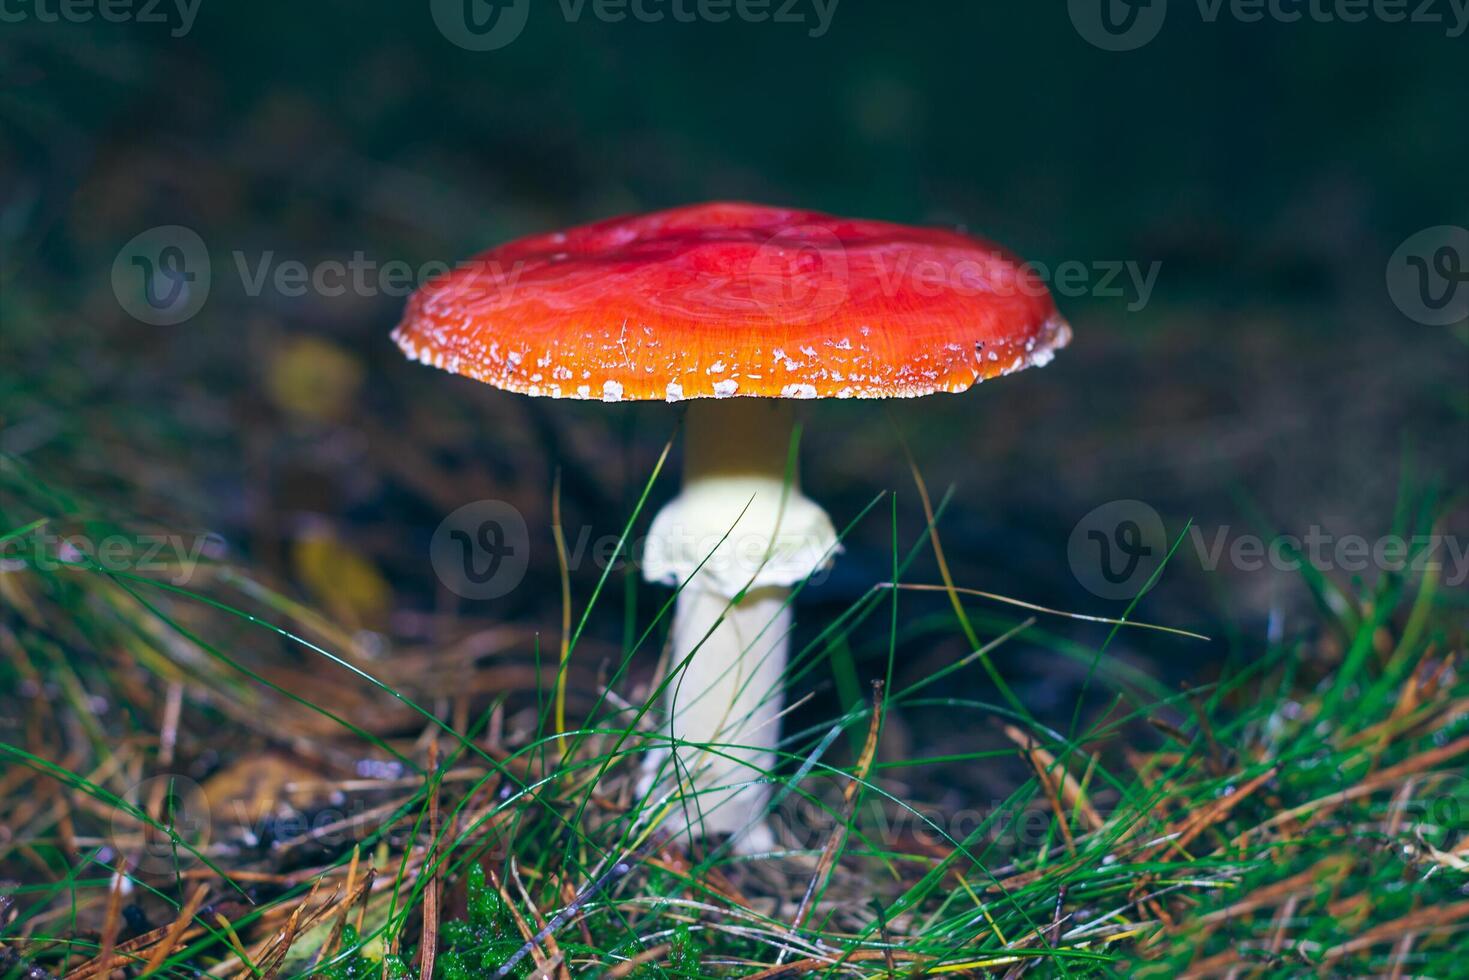 Mature Amanita Muscaria, Known as the Fly Agaric or Fly Amanita. Healing and Medicinal Mushroom with Red Cap Growing in Forest. Can Be Used for Micro Dosing, Spiritual Practices and Shaman Rituals photo